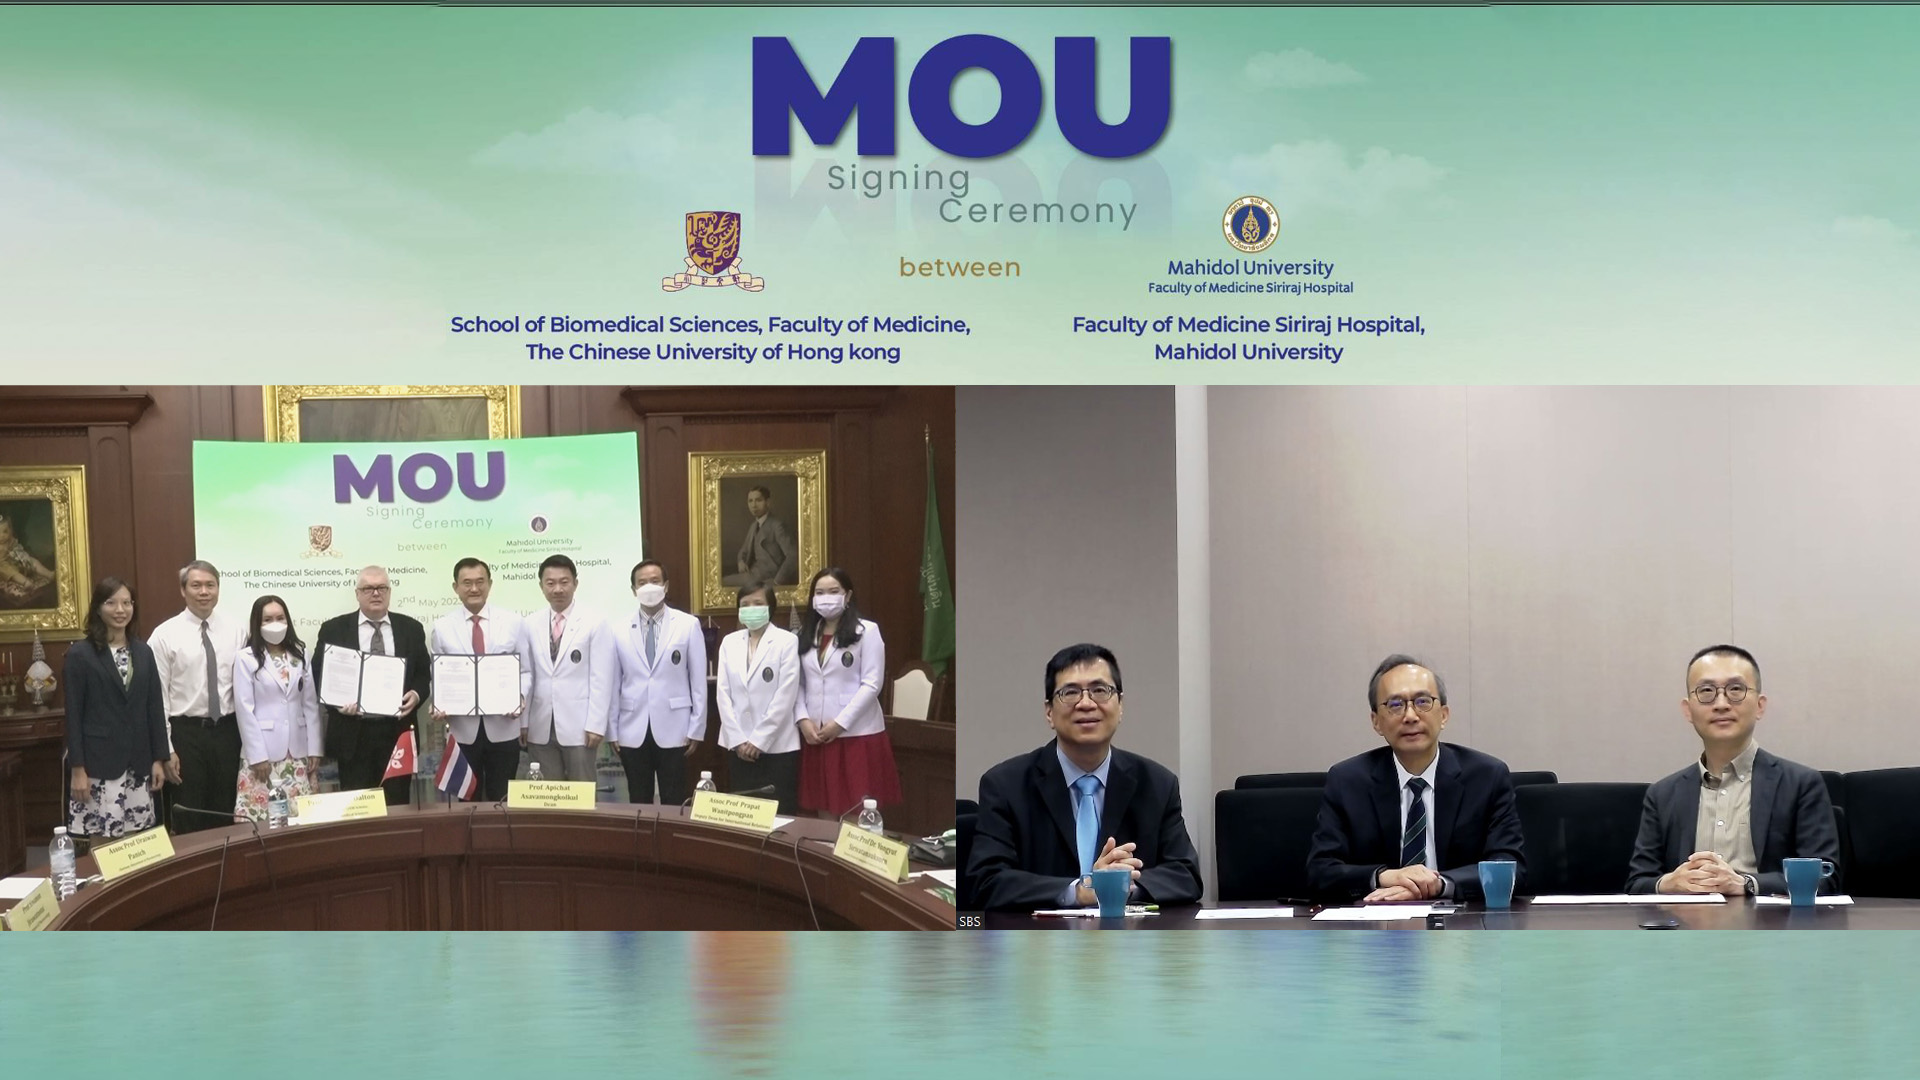 The “Hybrid” MOU Signing Ceremony Between Chinese University of Hong Kong and Siriraj